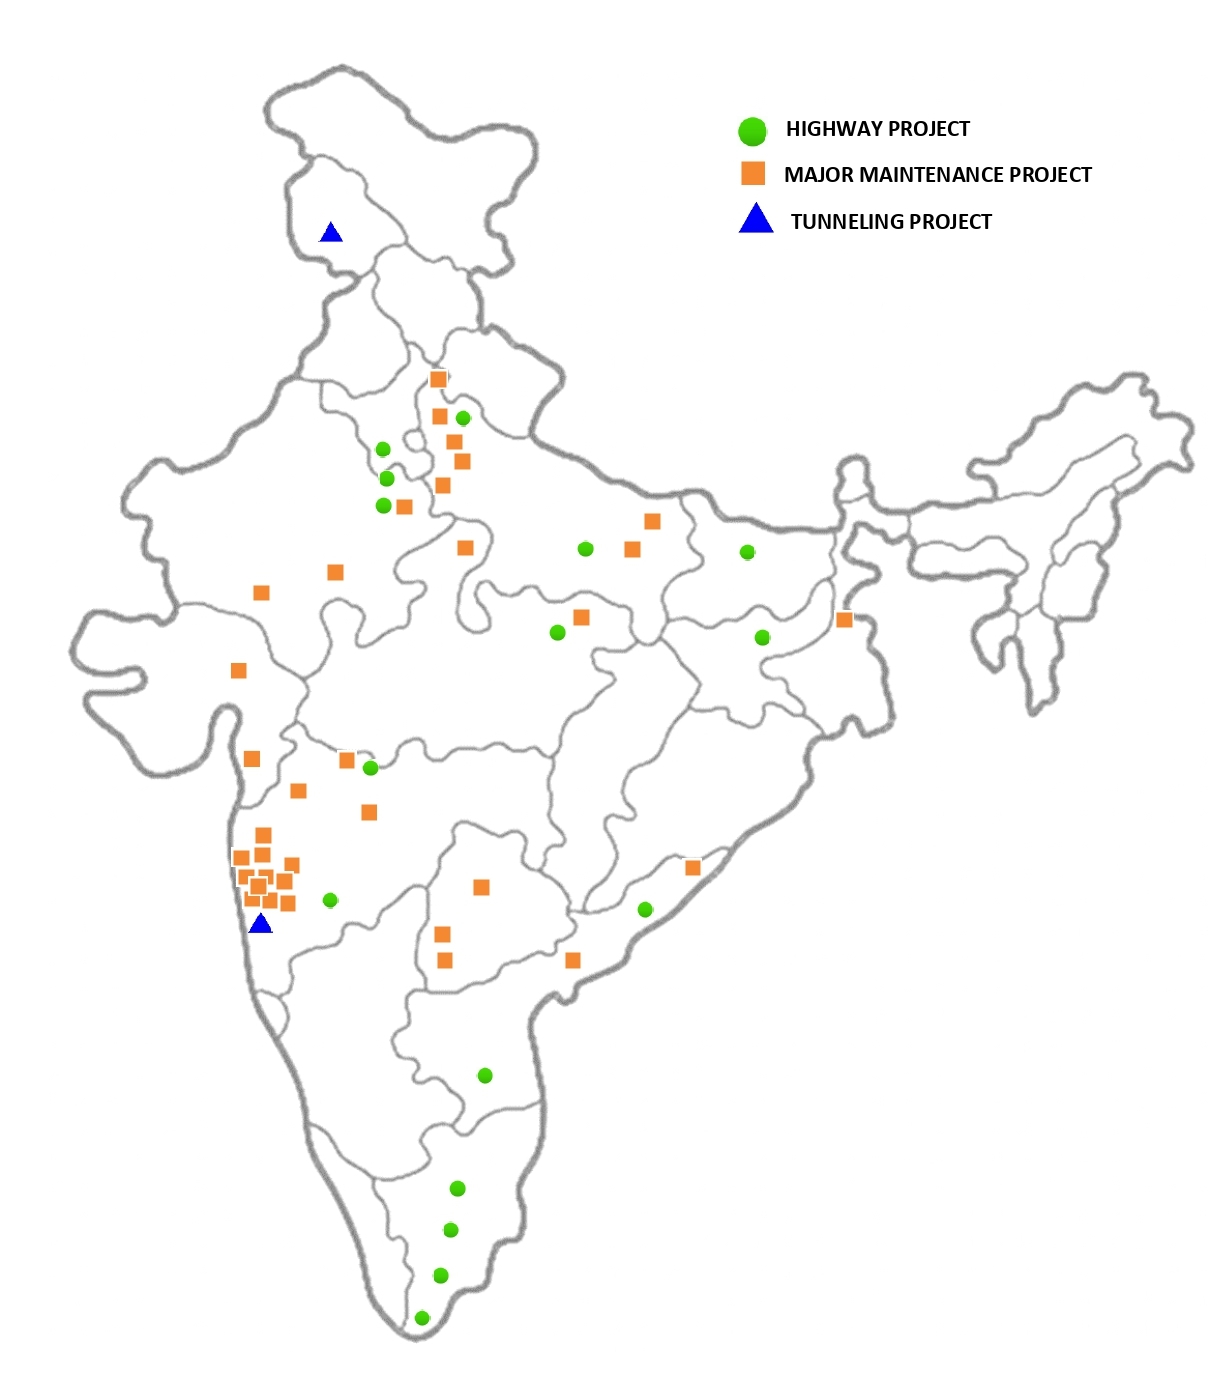 Projects across India